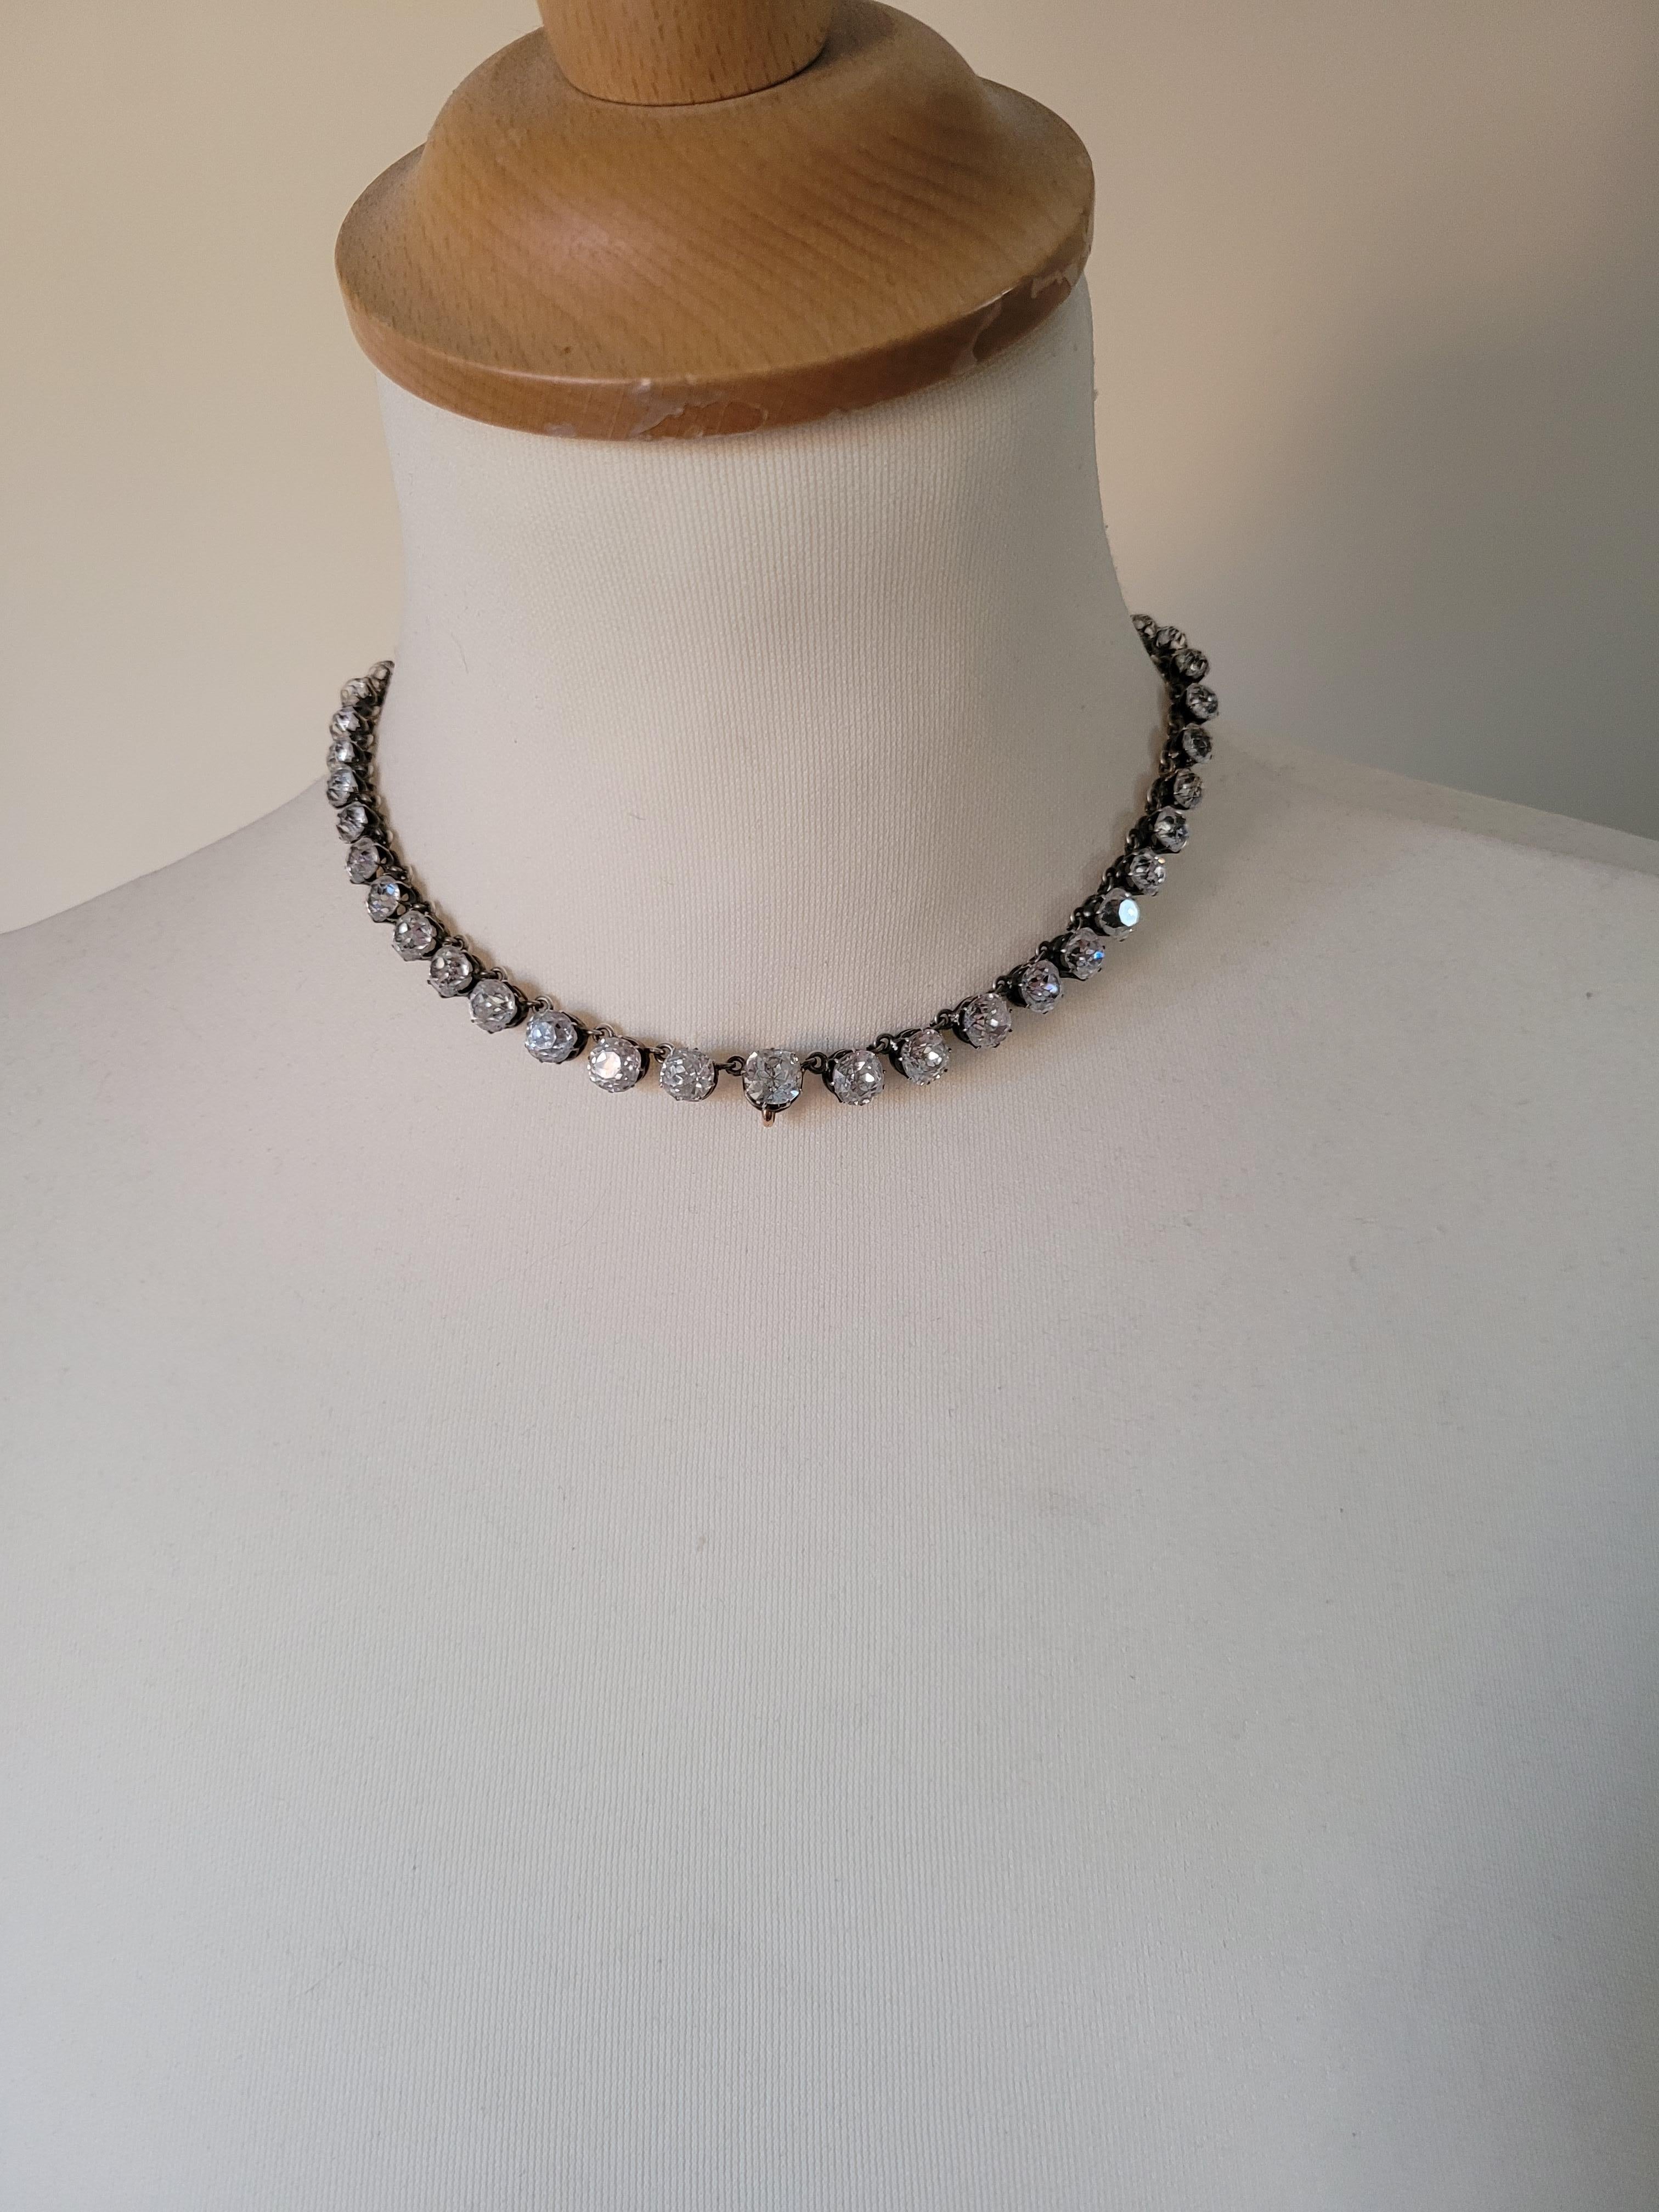 Antique Victorian Cushion Paste Silver Riviere Necklace For Sale 2